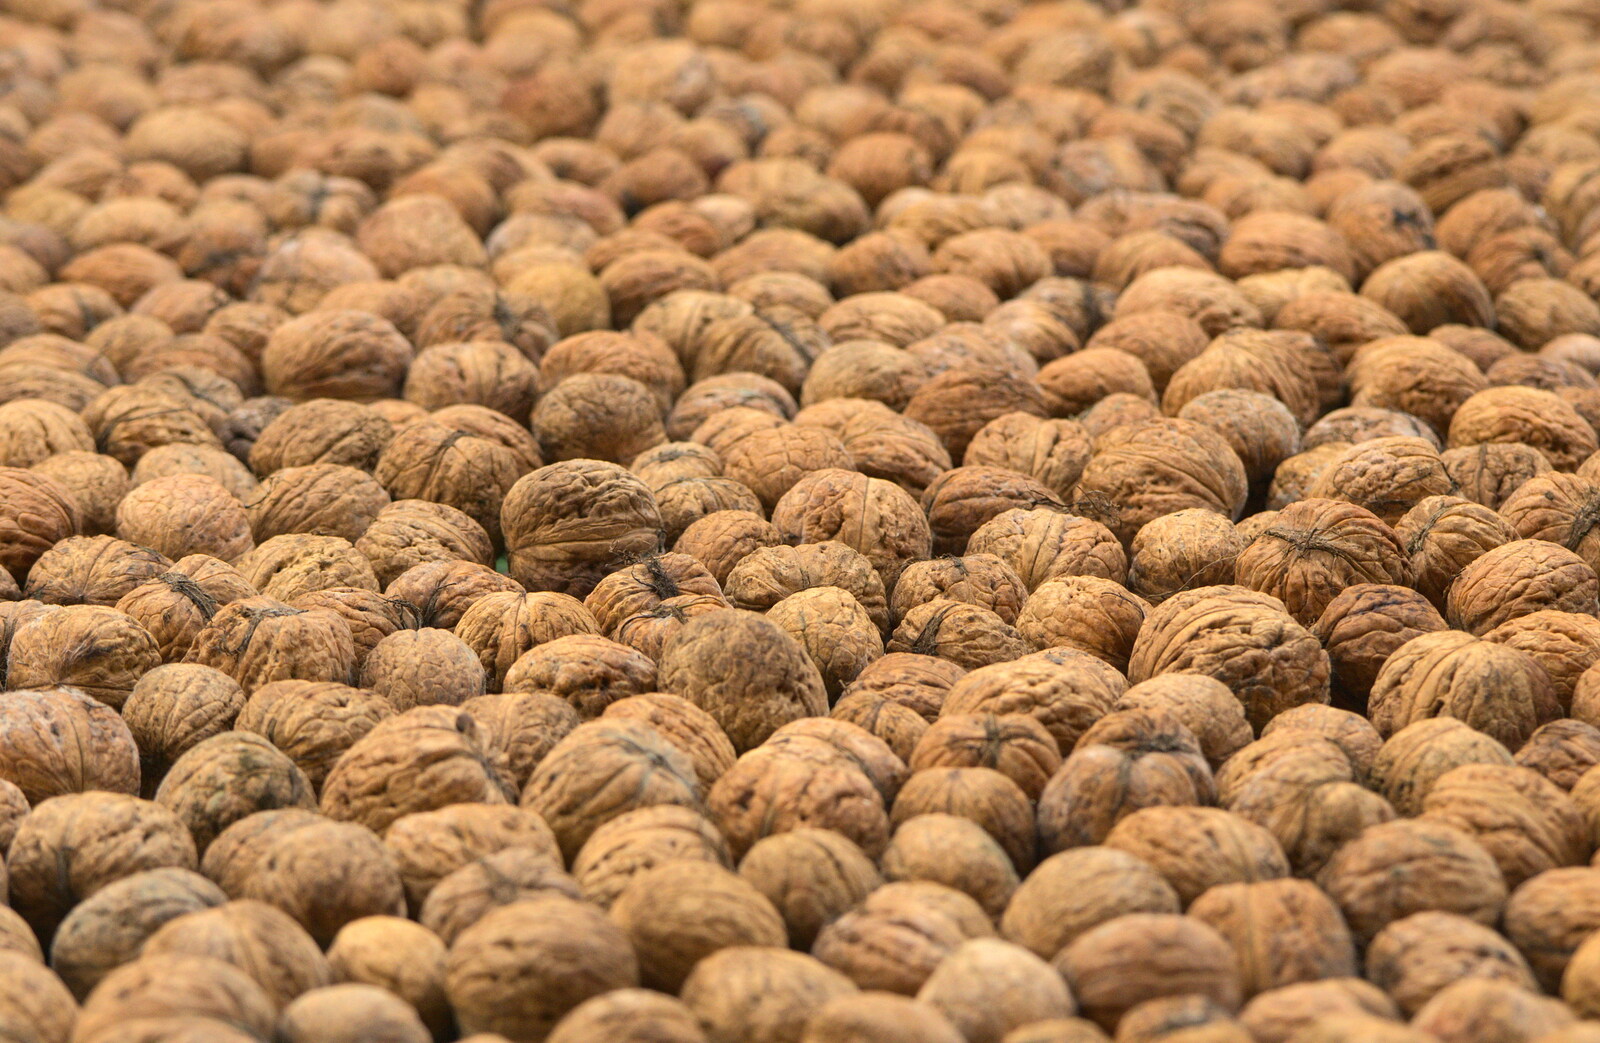 A mass of walnuts from Fred's Shop, Brome, Suffolk - 20th September 2014